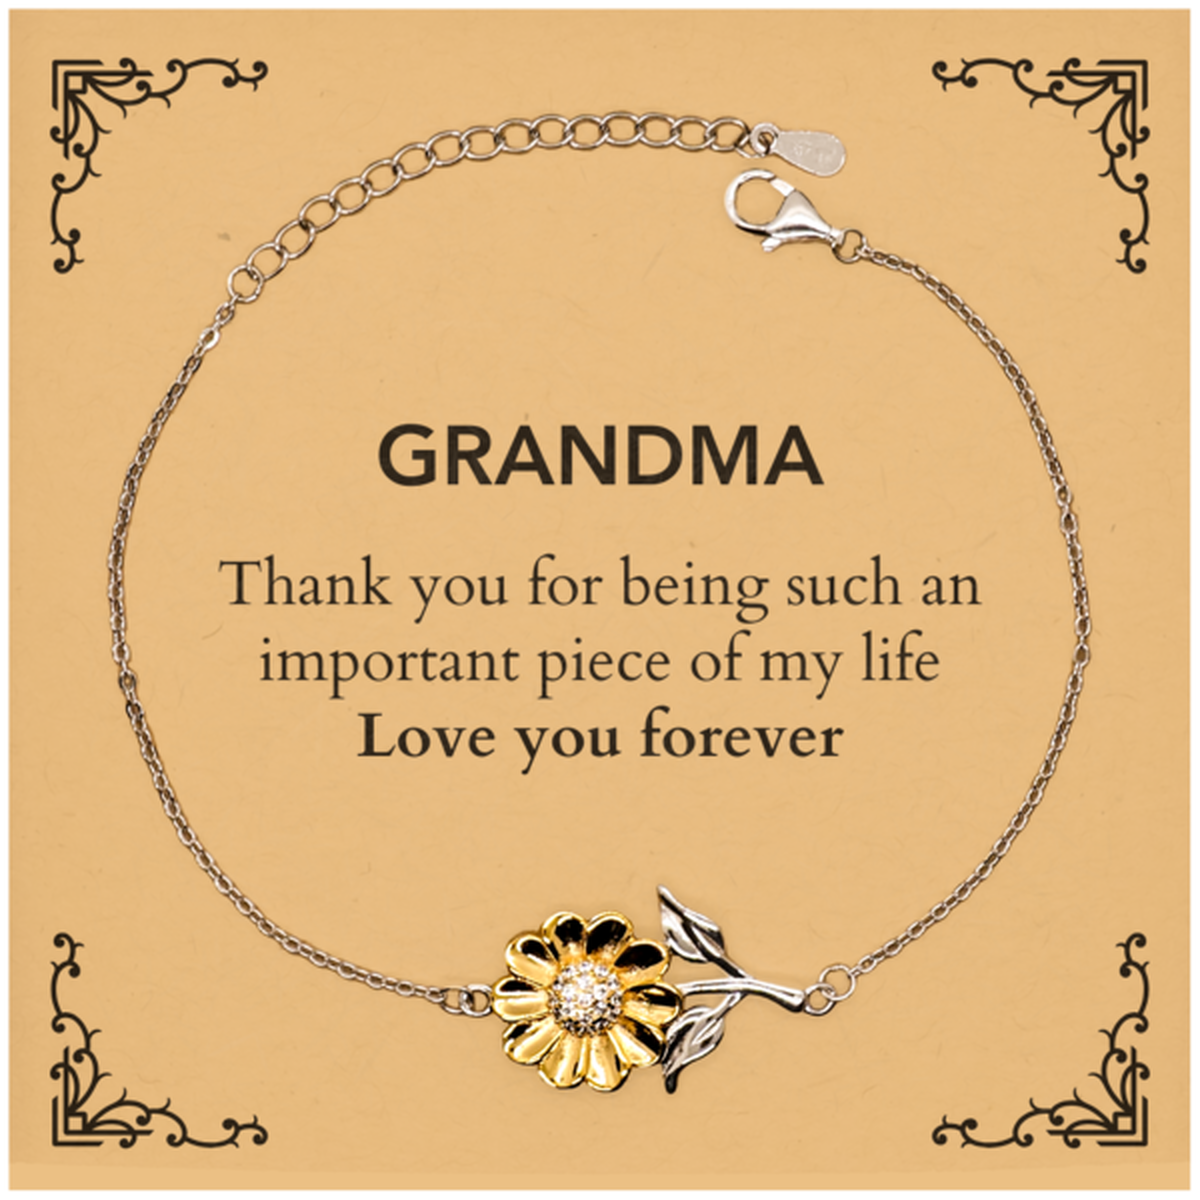 Appropriate Grandma Sunflower Bracelet Epic Birthday Gifts for Grandma Thank you for being such an important piece of my life Grandma Christmas Mothers Fathers Day